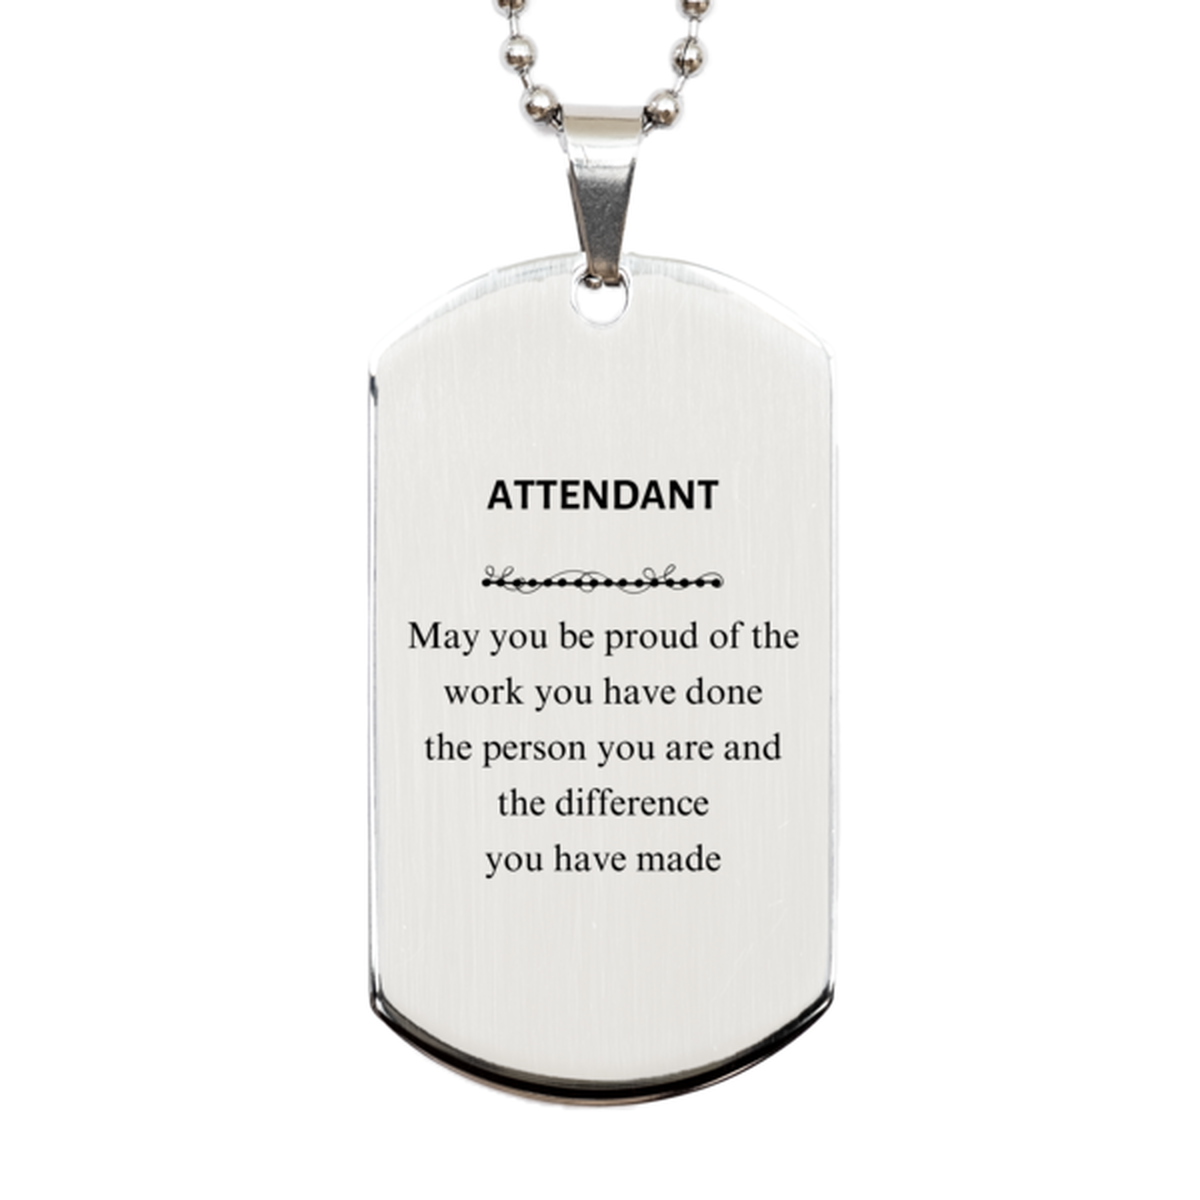 Attendant May you be proud of the work you have done, Retirement Attendant Silver Dog Tag for Colleague Appreciation Gifts Amazing for Attendant